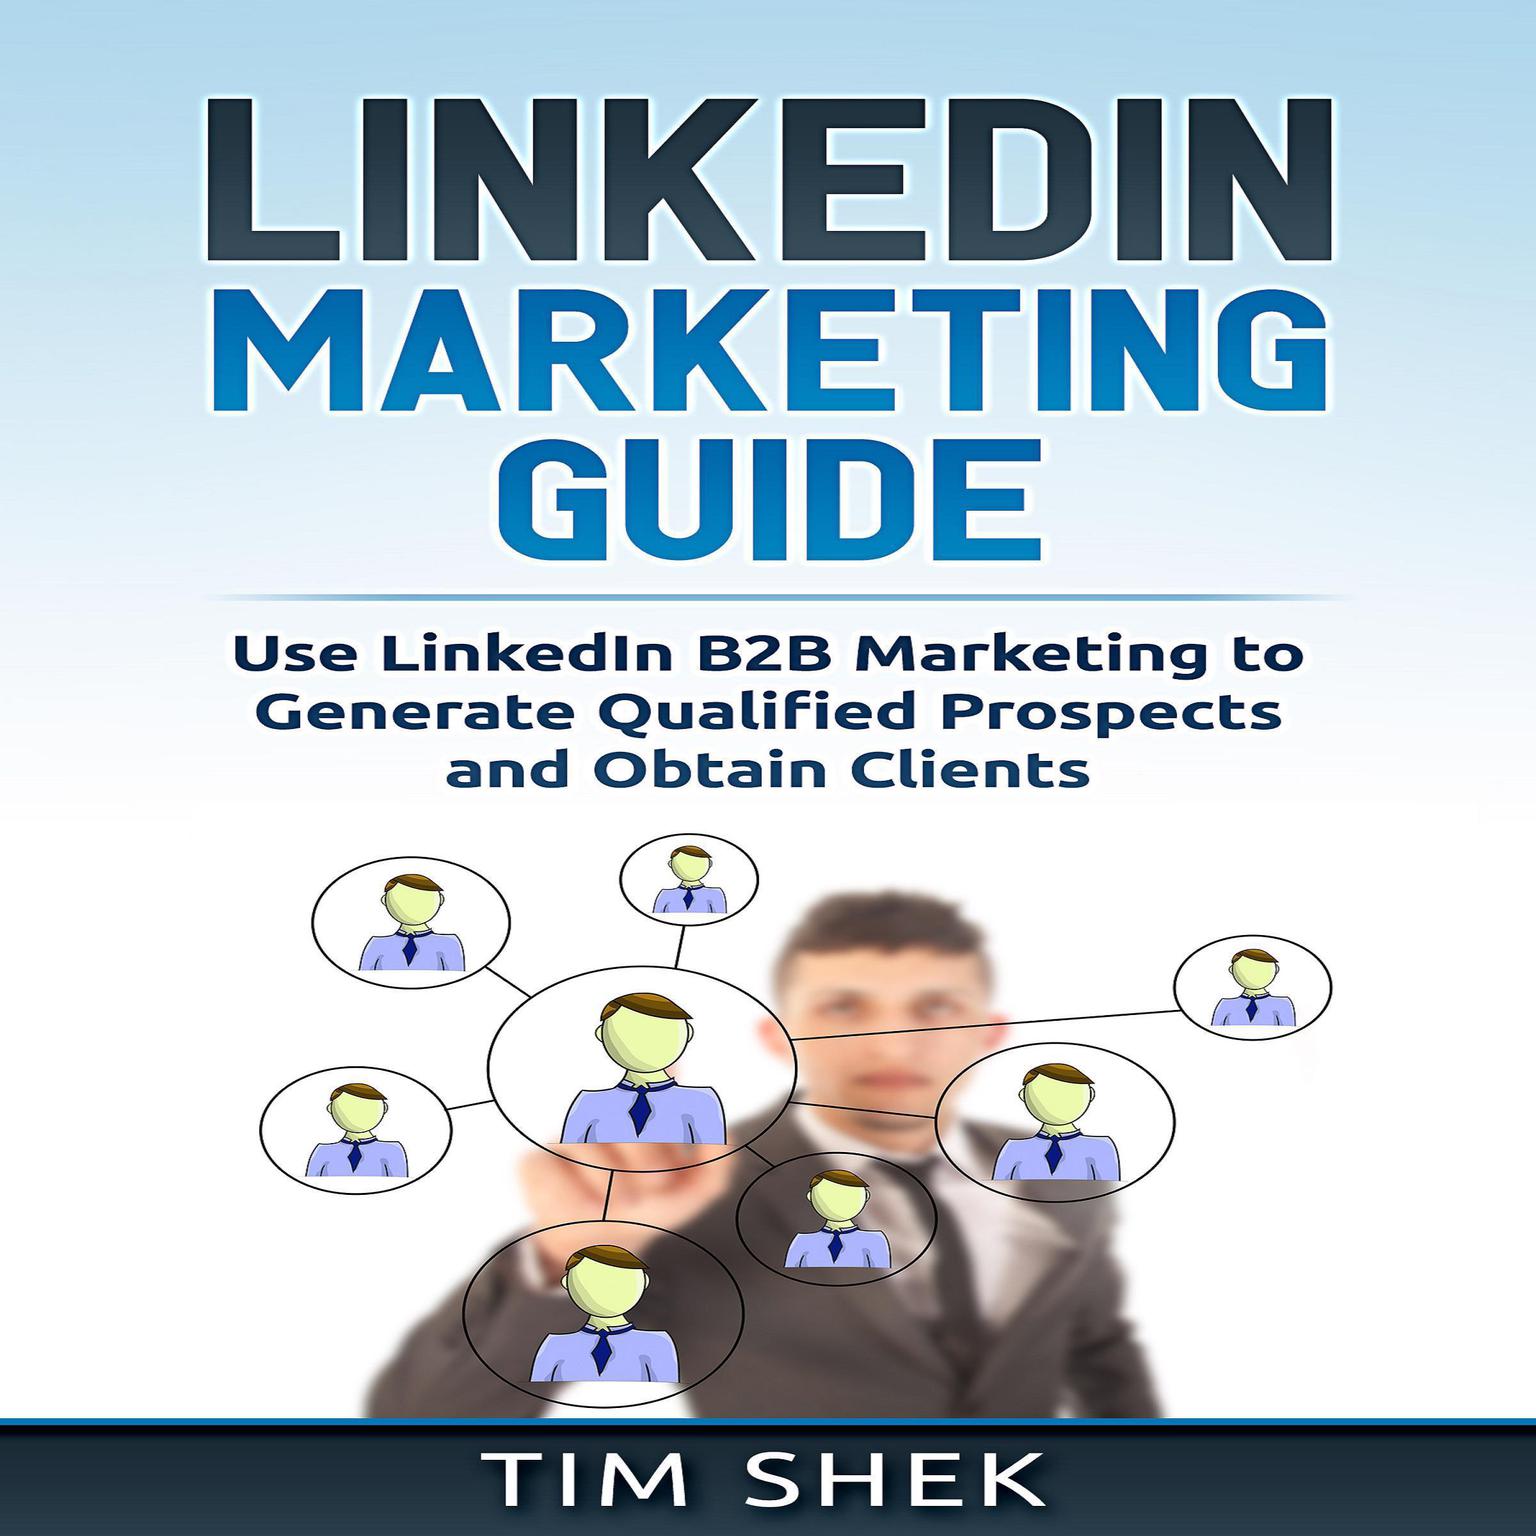 LinkedIn Marketing: Use LinkedIn B2B Marketing to Generate Qualified Prospects and Obtain Clients Audiobook, by Tim Shek